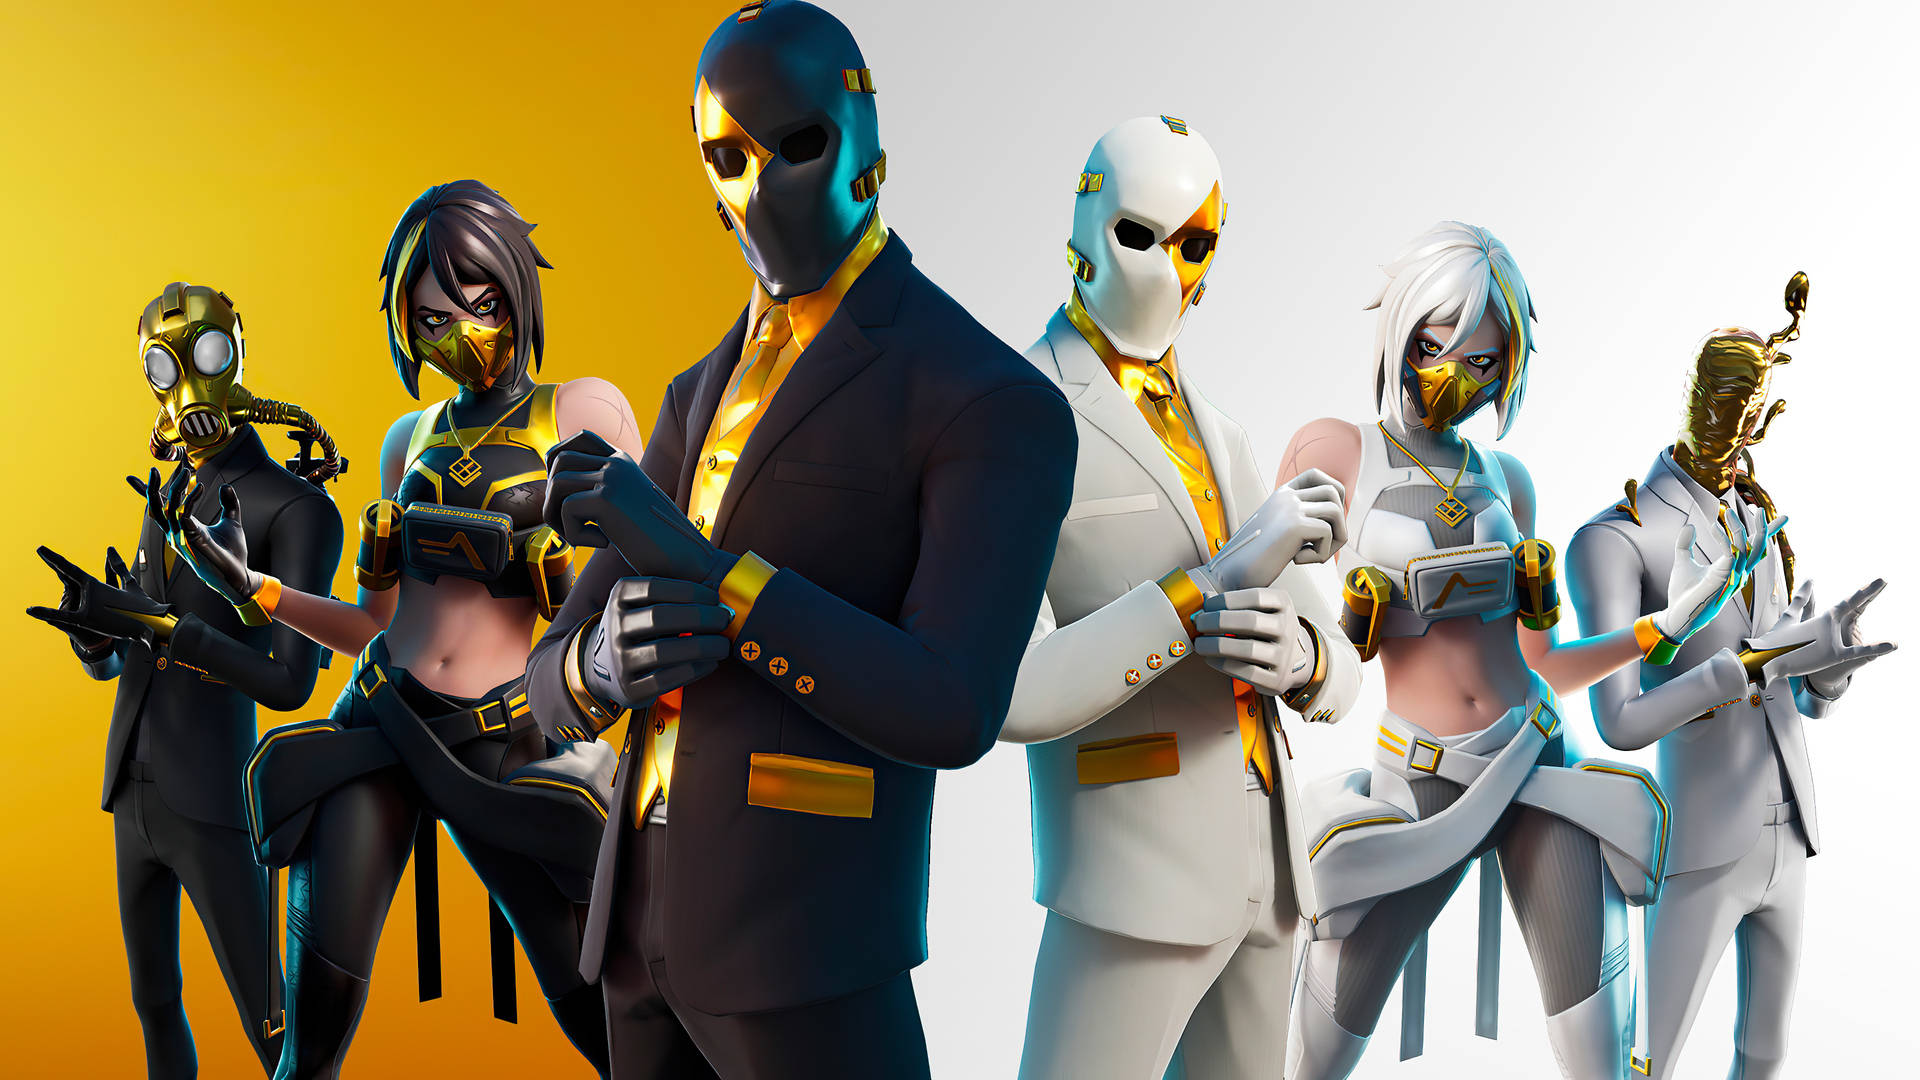 Outwit Your Opponents With A 1080 Fortnite Game Wallpaper